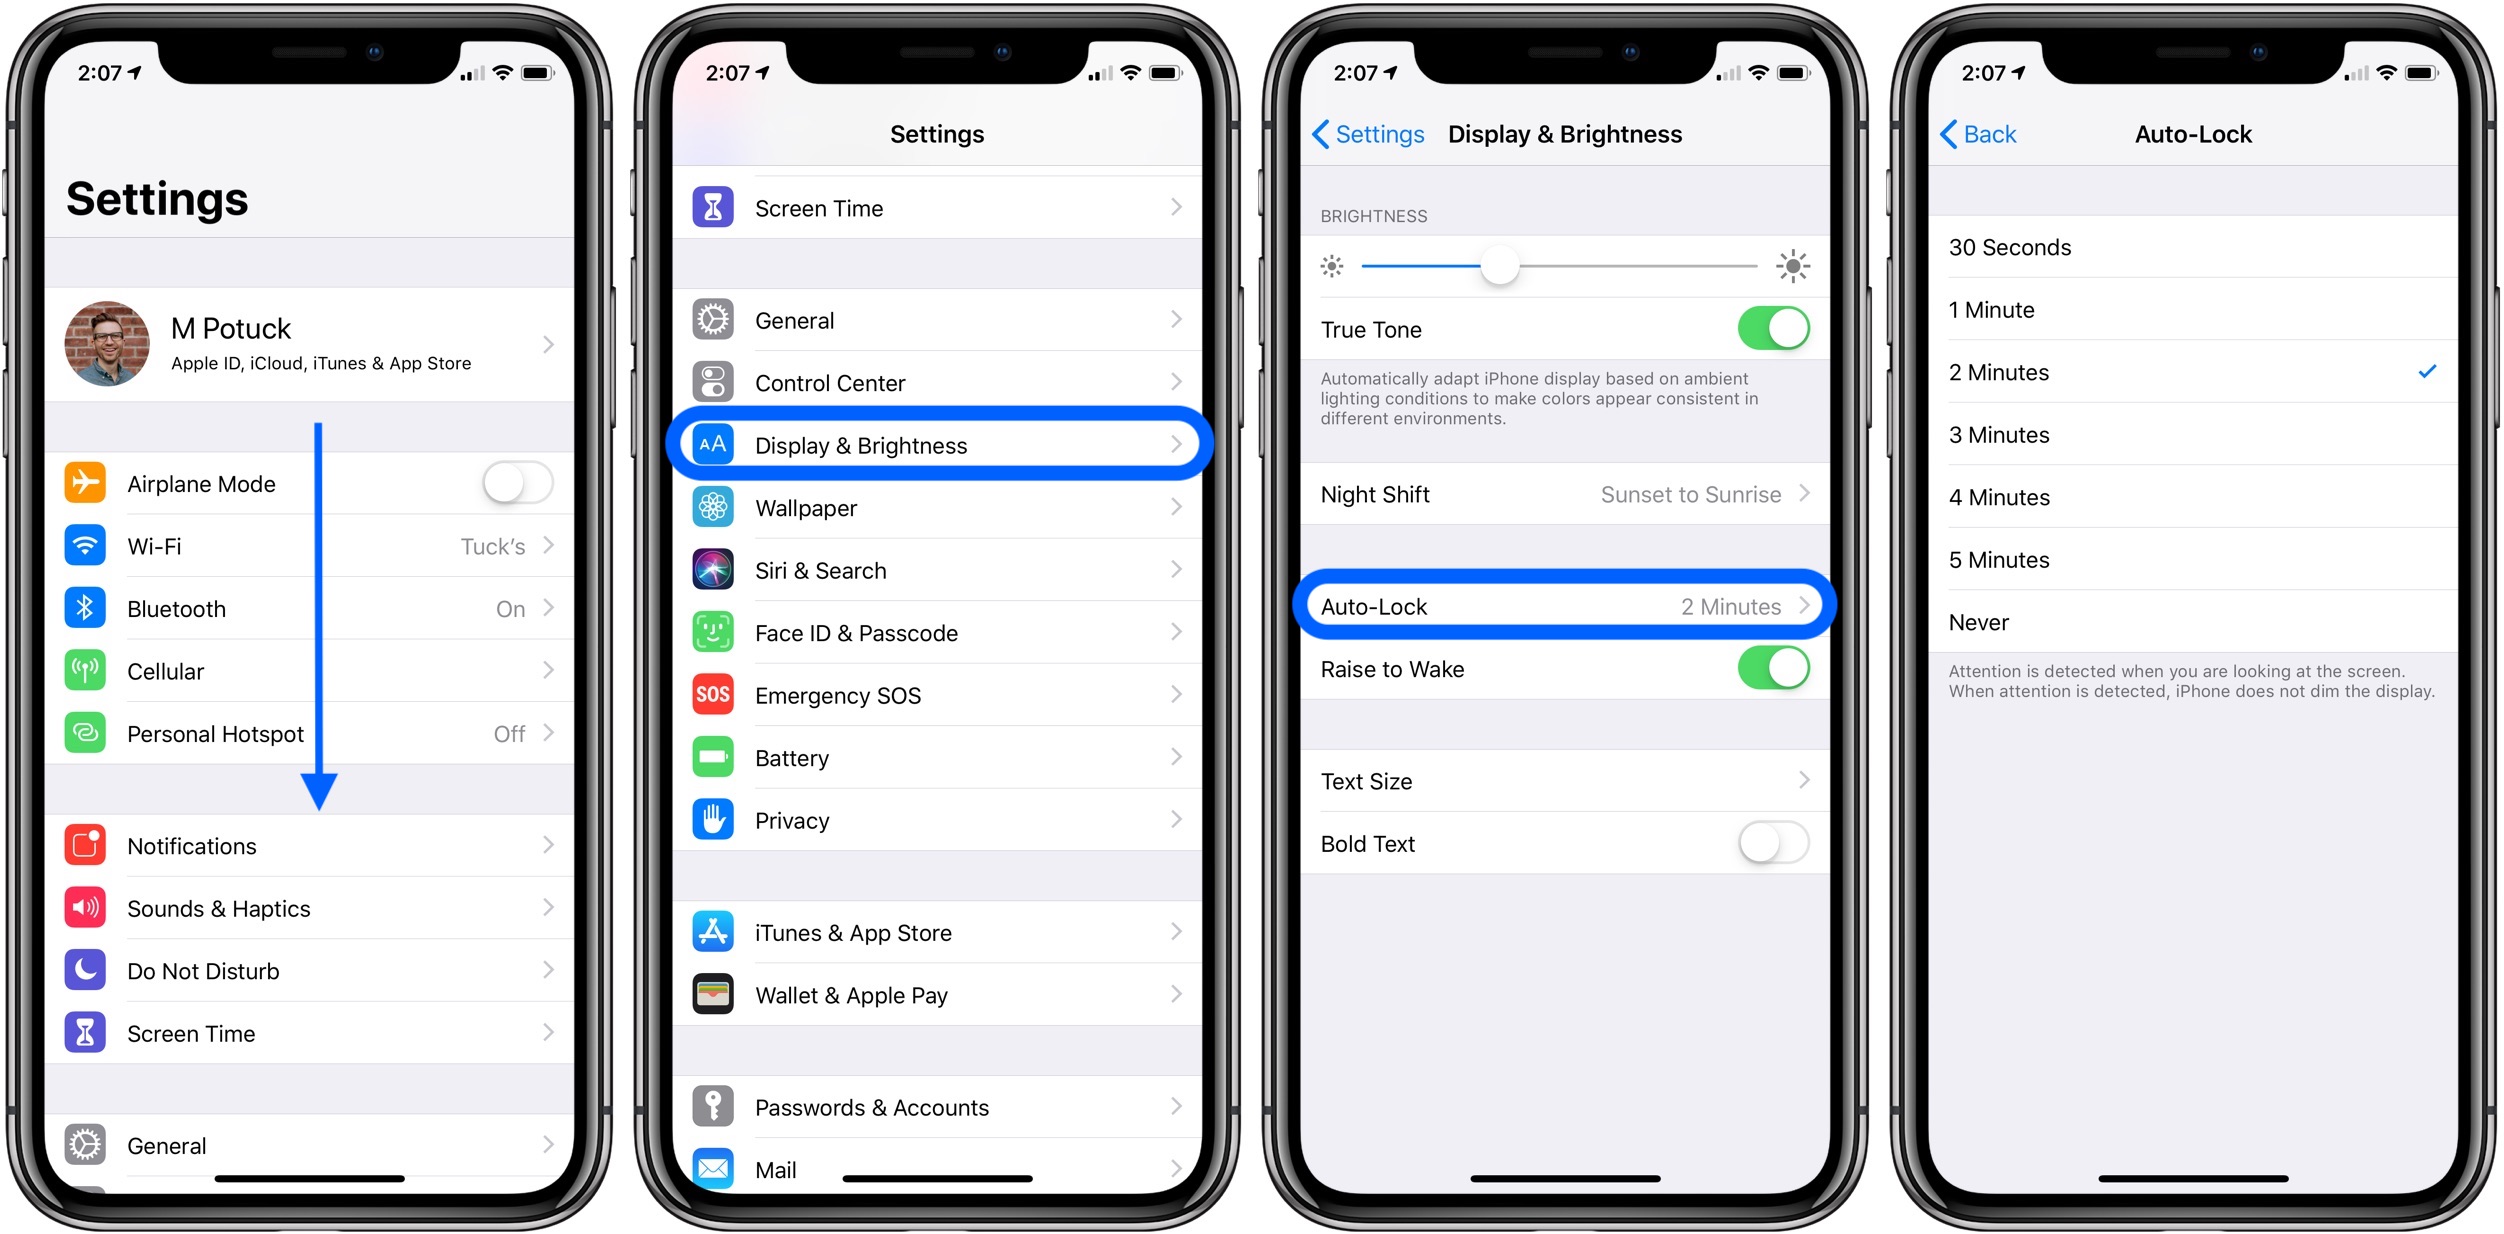 How to Change Screen Timeout on iPhone